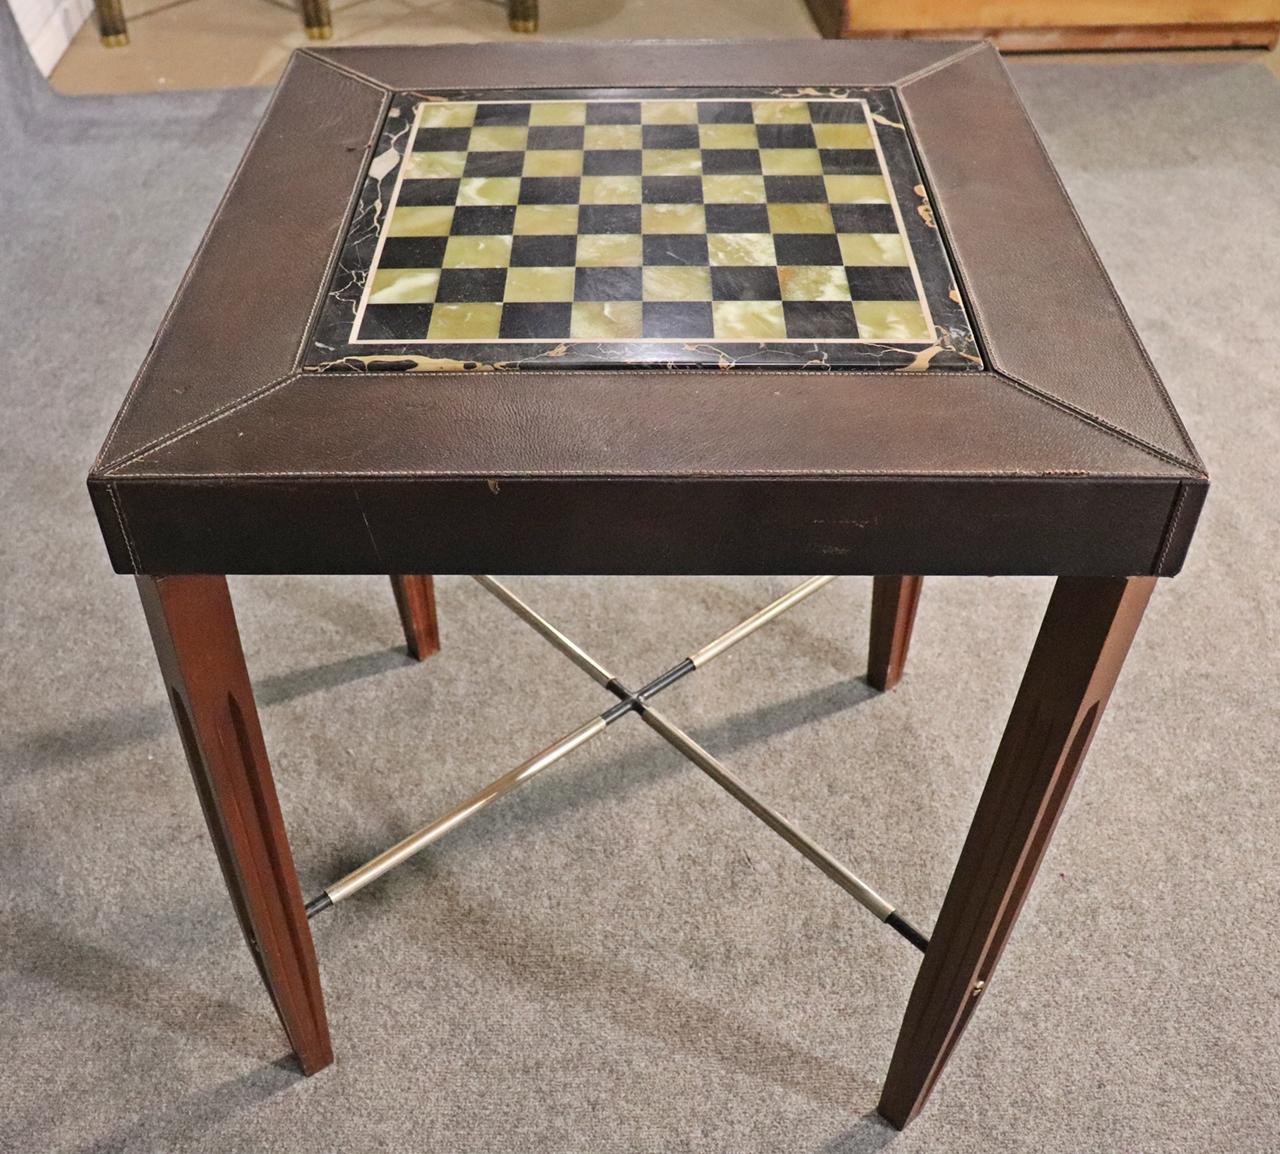 Exceptional Quality Aldo Tura Style Onyx and Leather Games Tables with Pieces 1